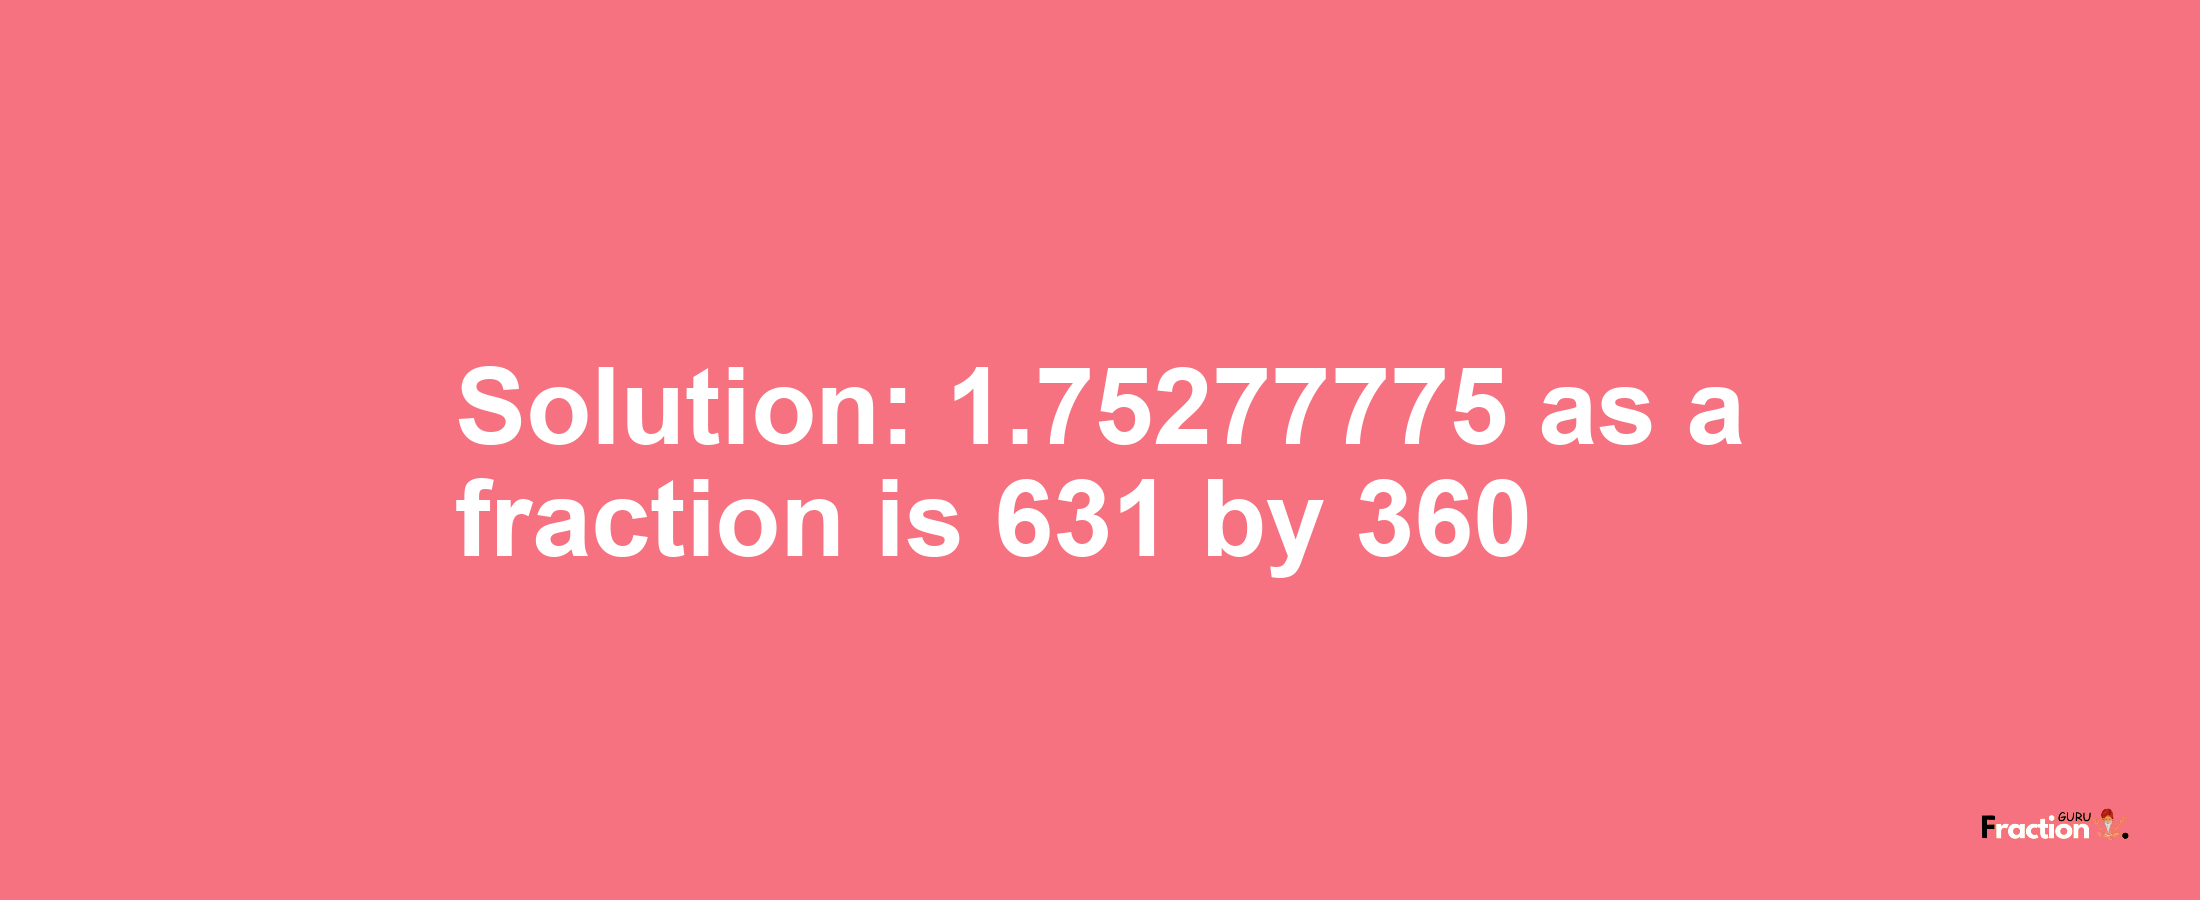 Solution:1.75277775 as a fraction is 631/360